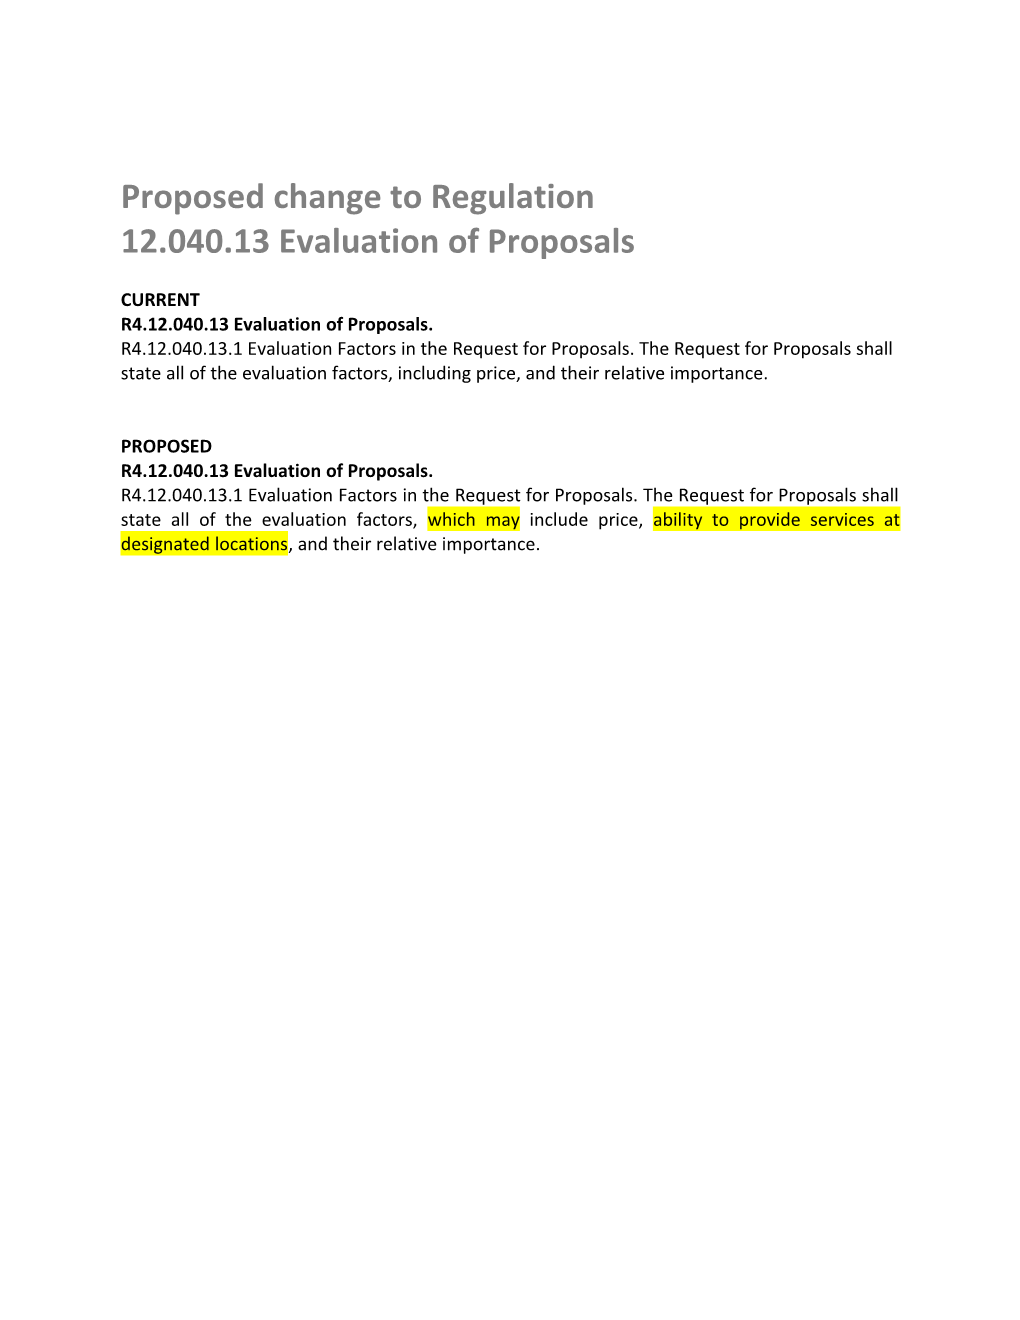 Proposed Change to Regulation 12.040.13 Evaluation of Proposals